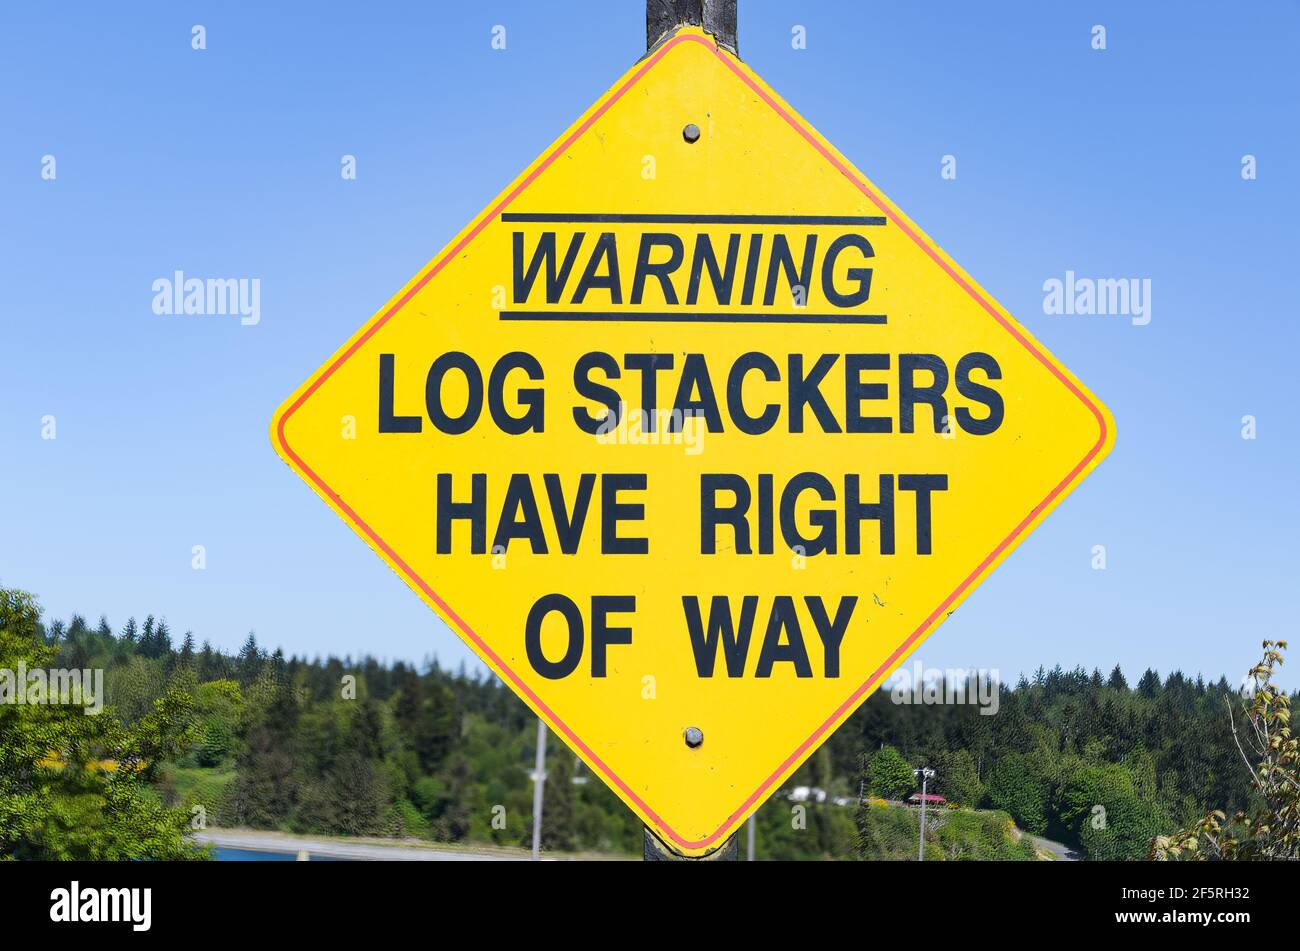 Warning - Log stackers have right of way black on yellow sign in the former logging town of Port Gamble in Washington State Stock Photo